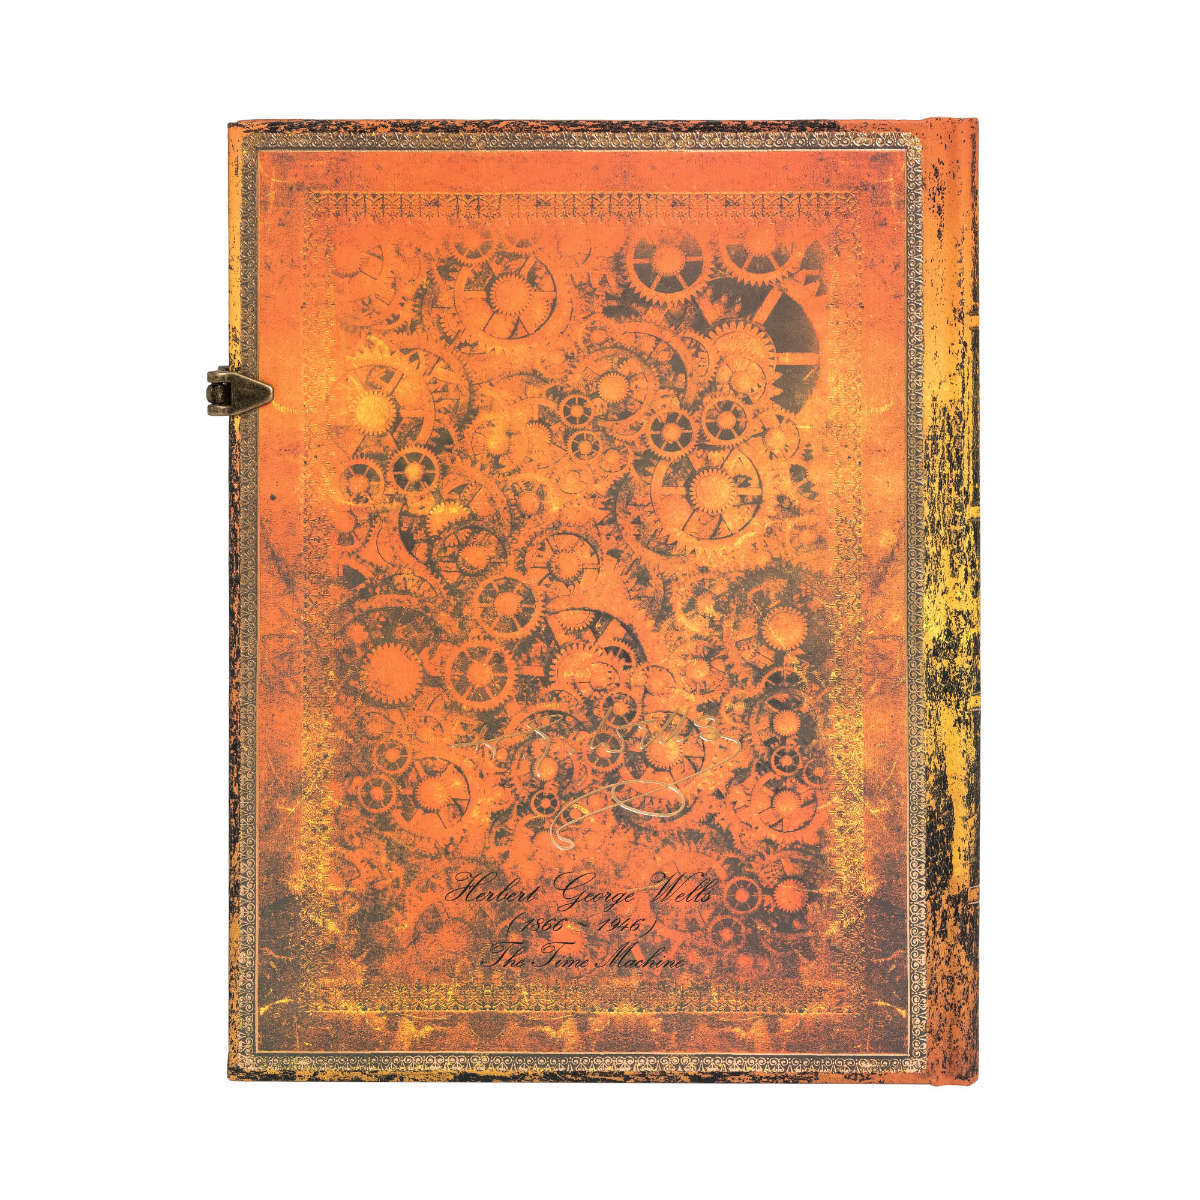 Paperblanks Special Editions H.G. Wells 75th Midi 5x7 Inch